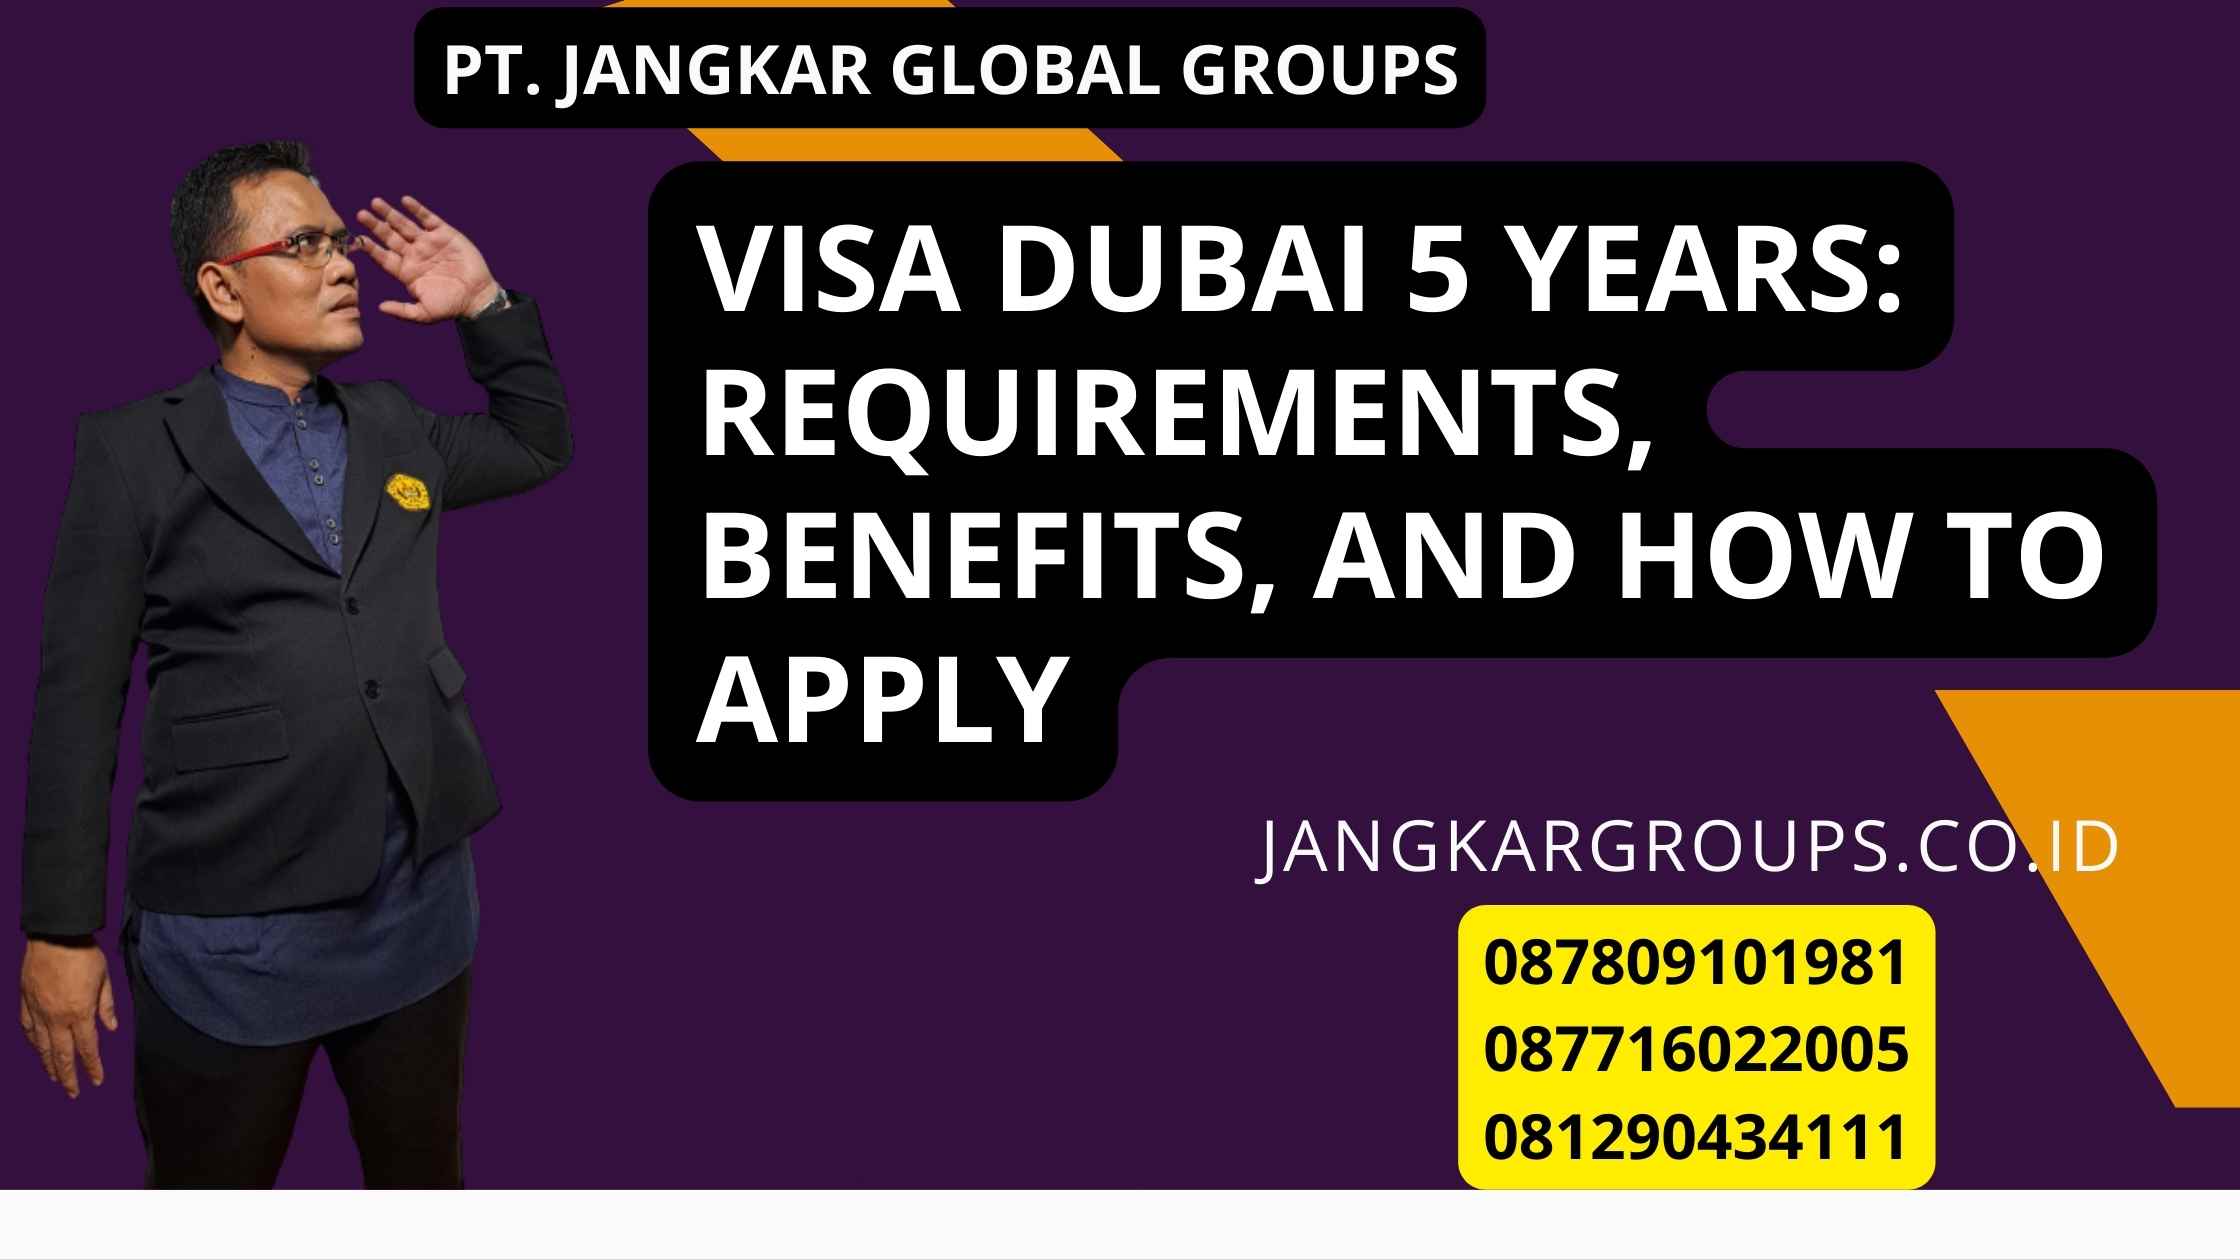 Visa Dubai 5 Years: Requirements, Benefits, and How to Apply